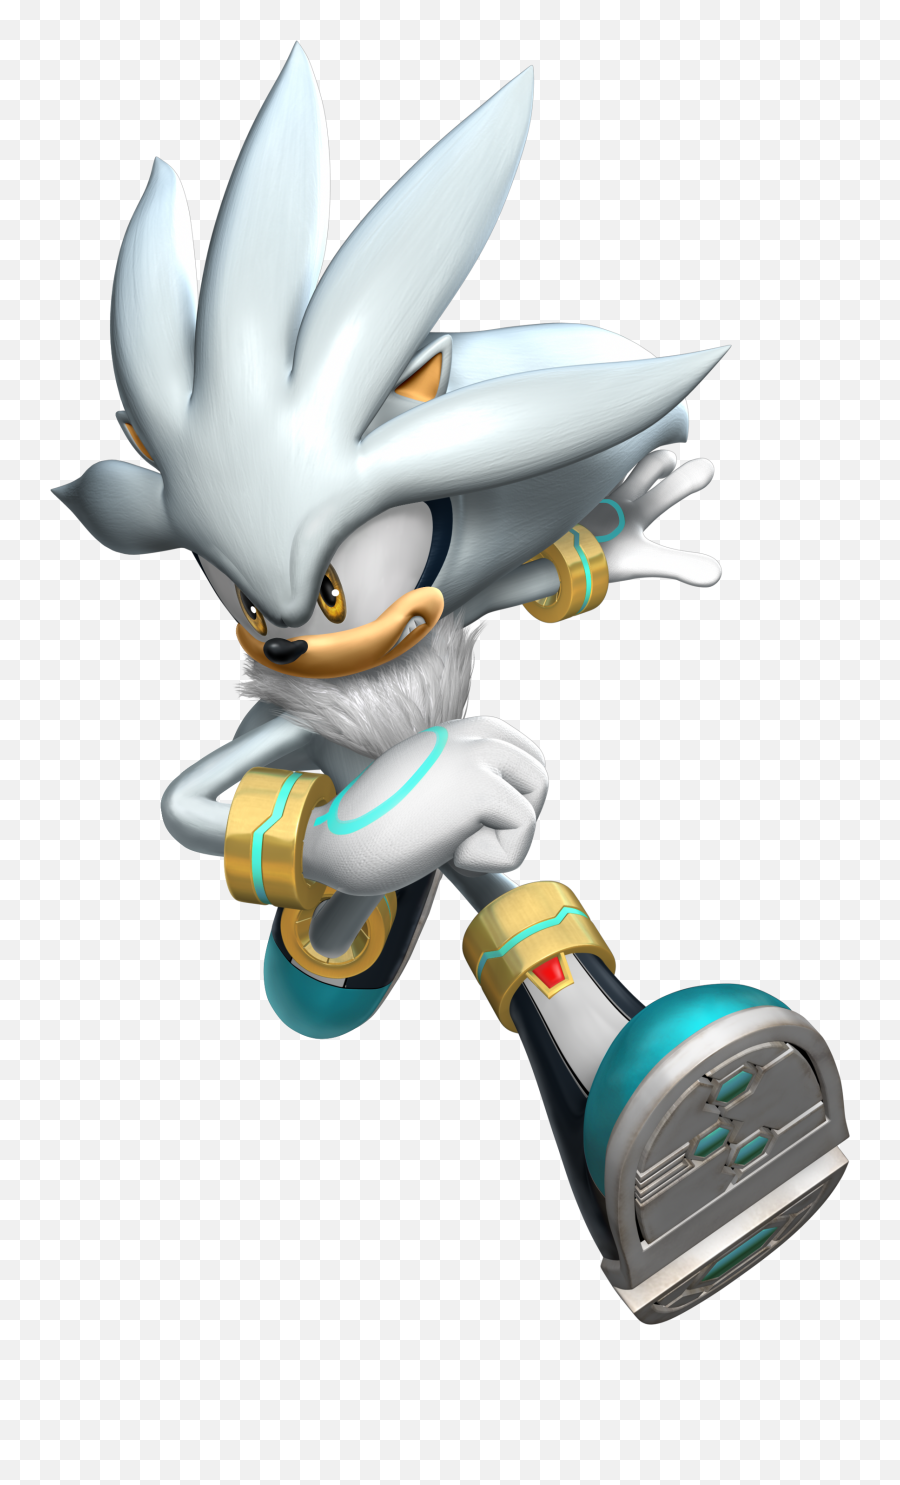 Rivals Silver - Silver The Hedgehog Sonic Rivals Png,Silver The Hedgehog Png